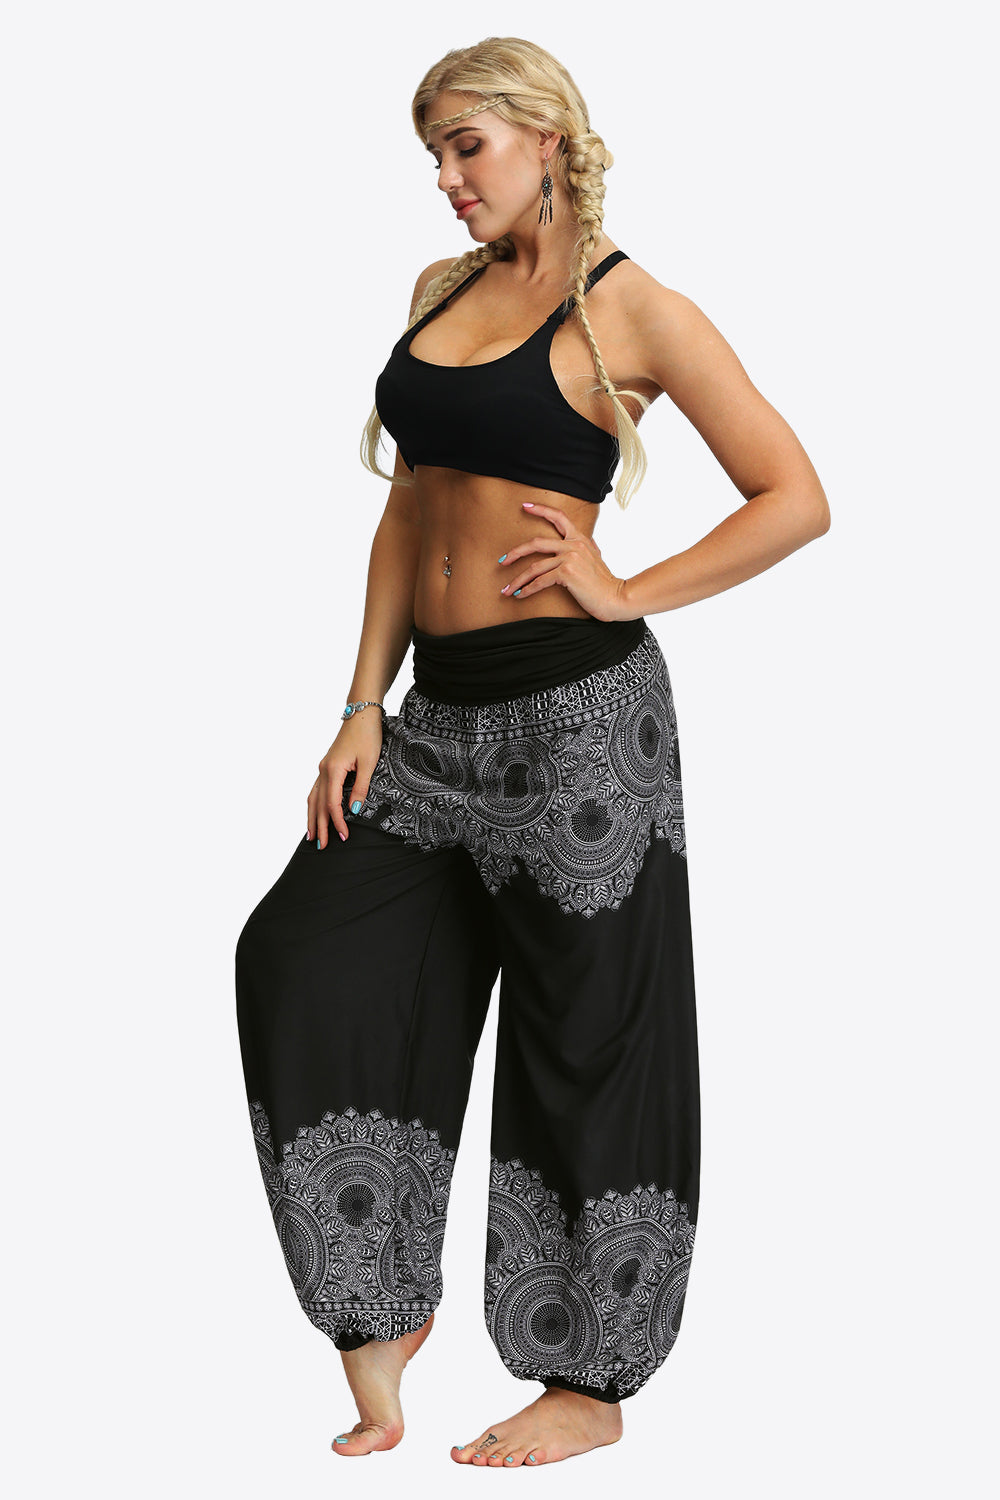 Harim Baggy Pants black and white side view